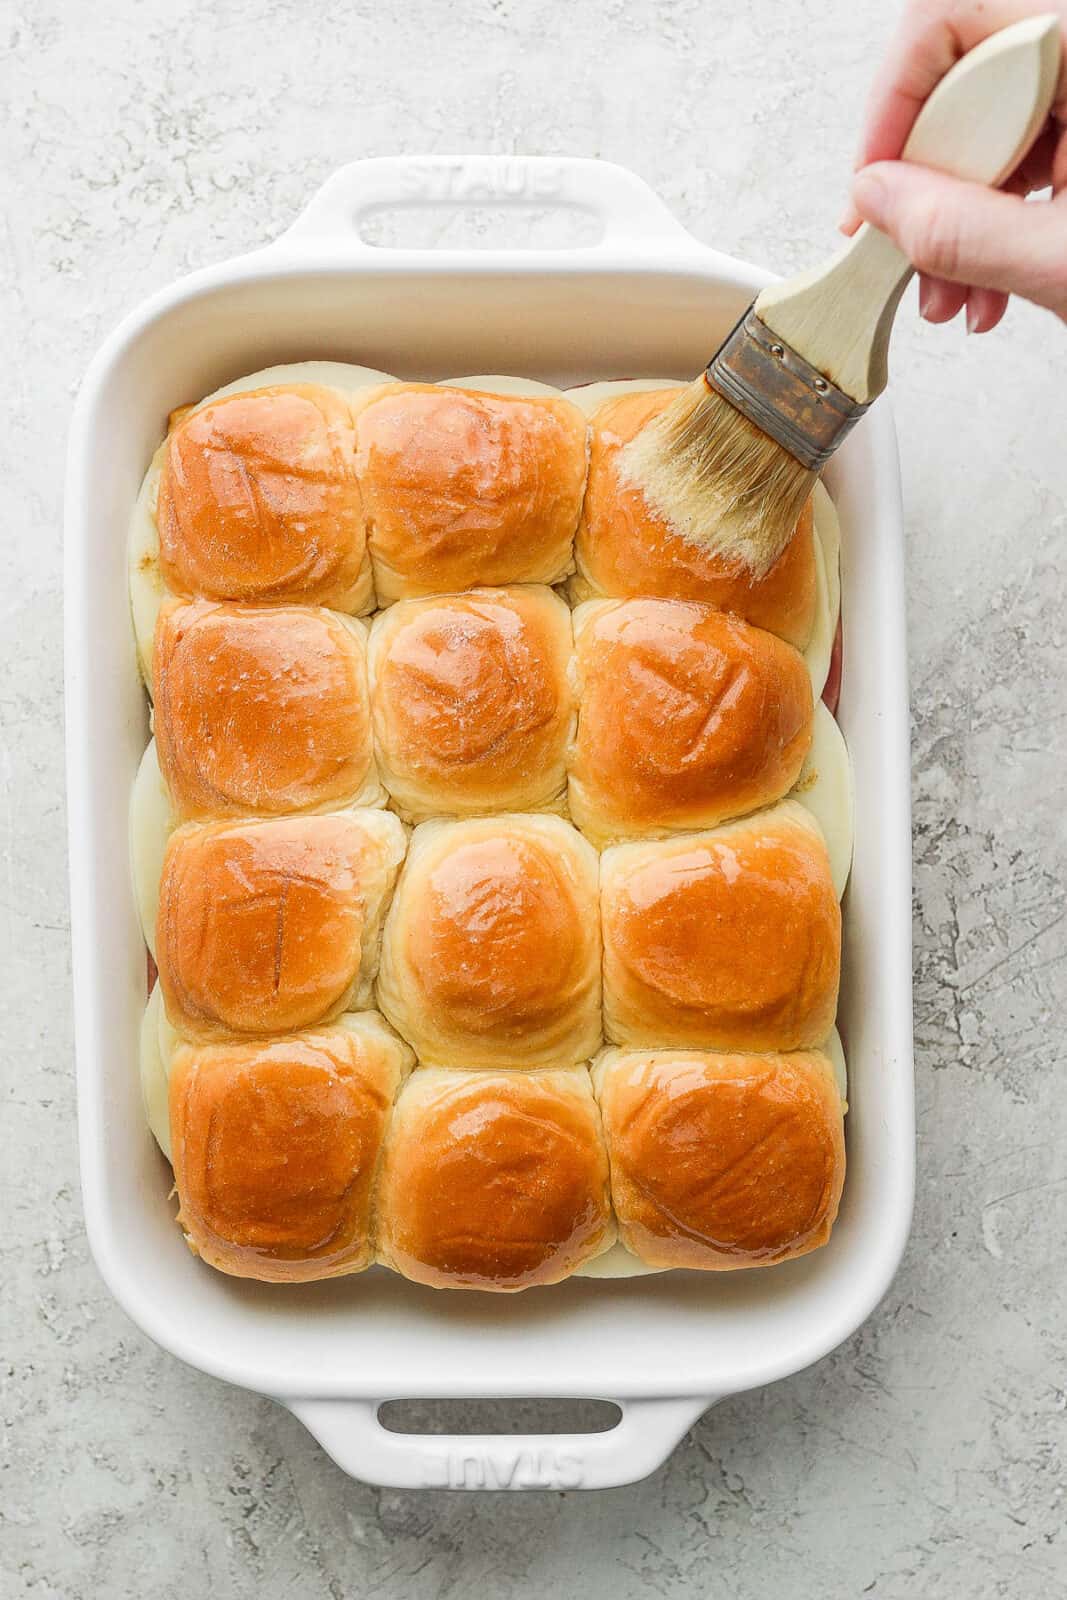 Melted butter being brushed on the top of the sliders.